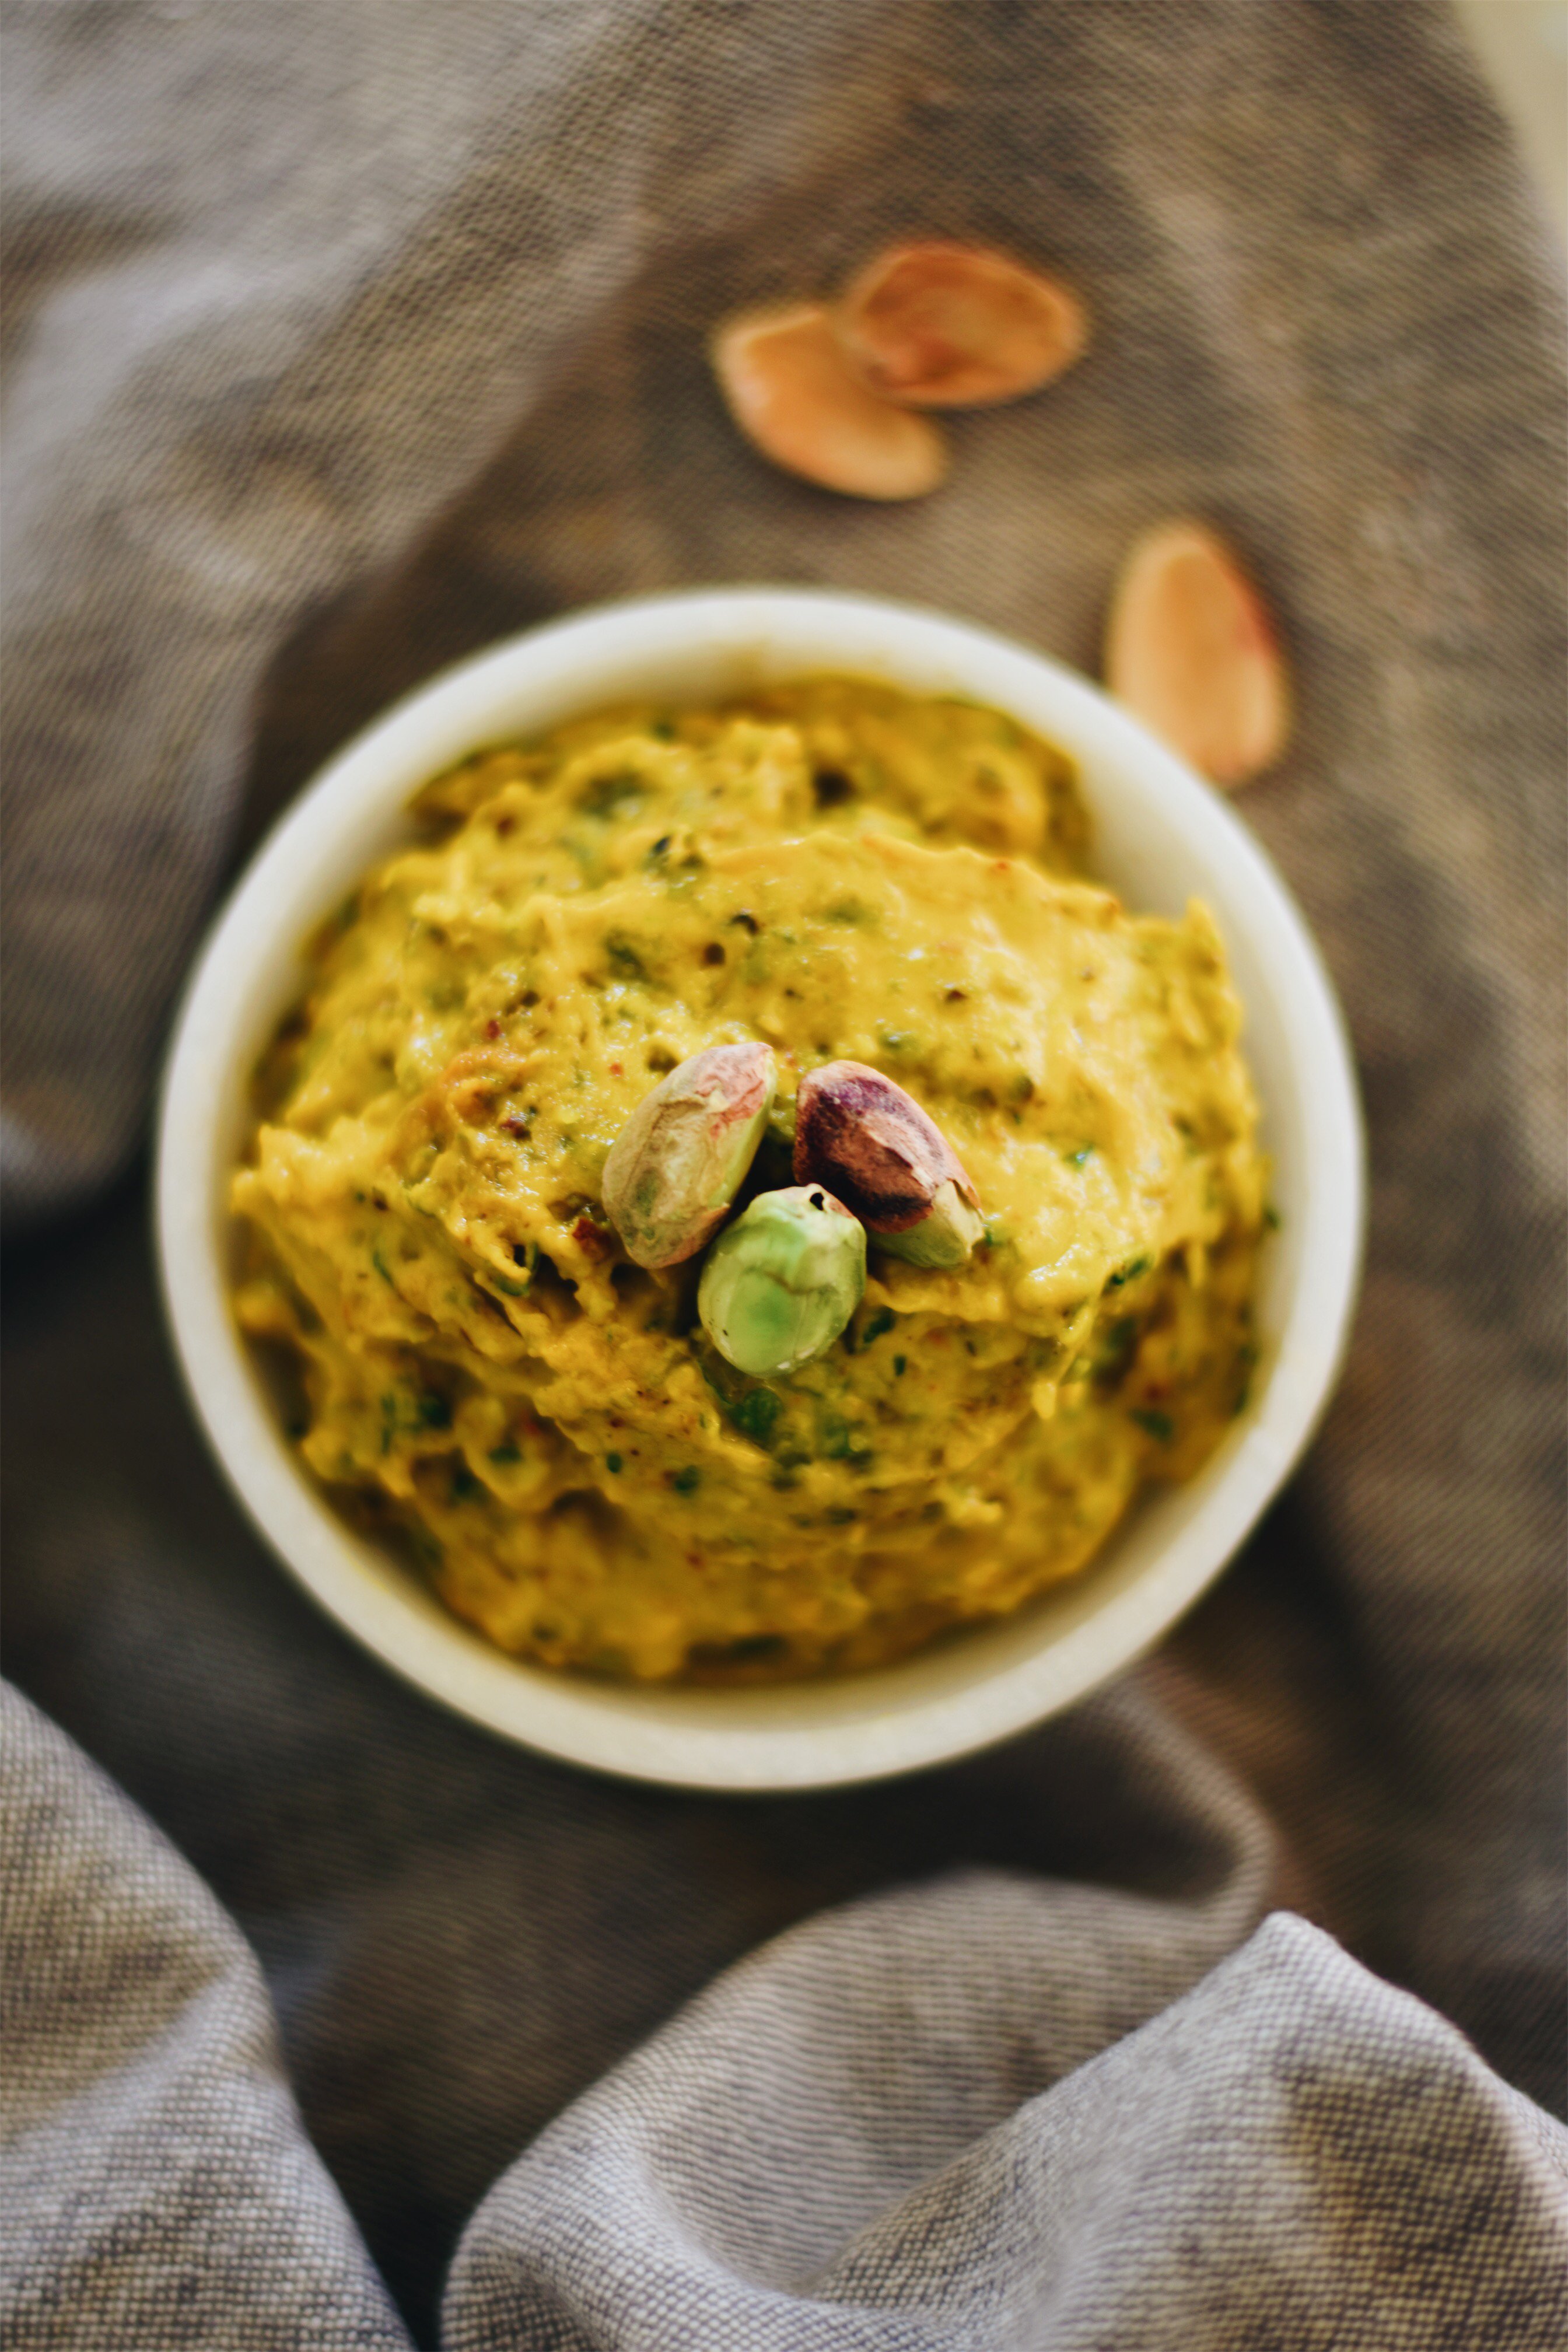 Featured image for “Turmeric and Pistachio Dip”